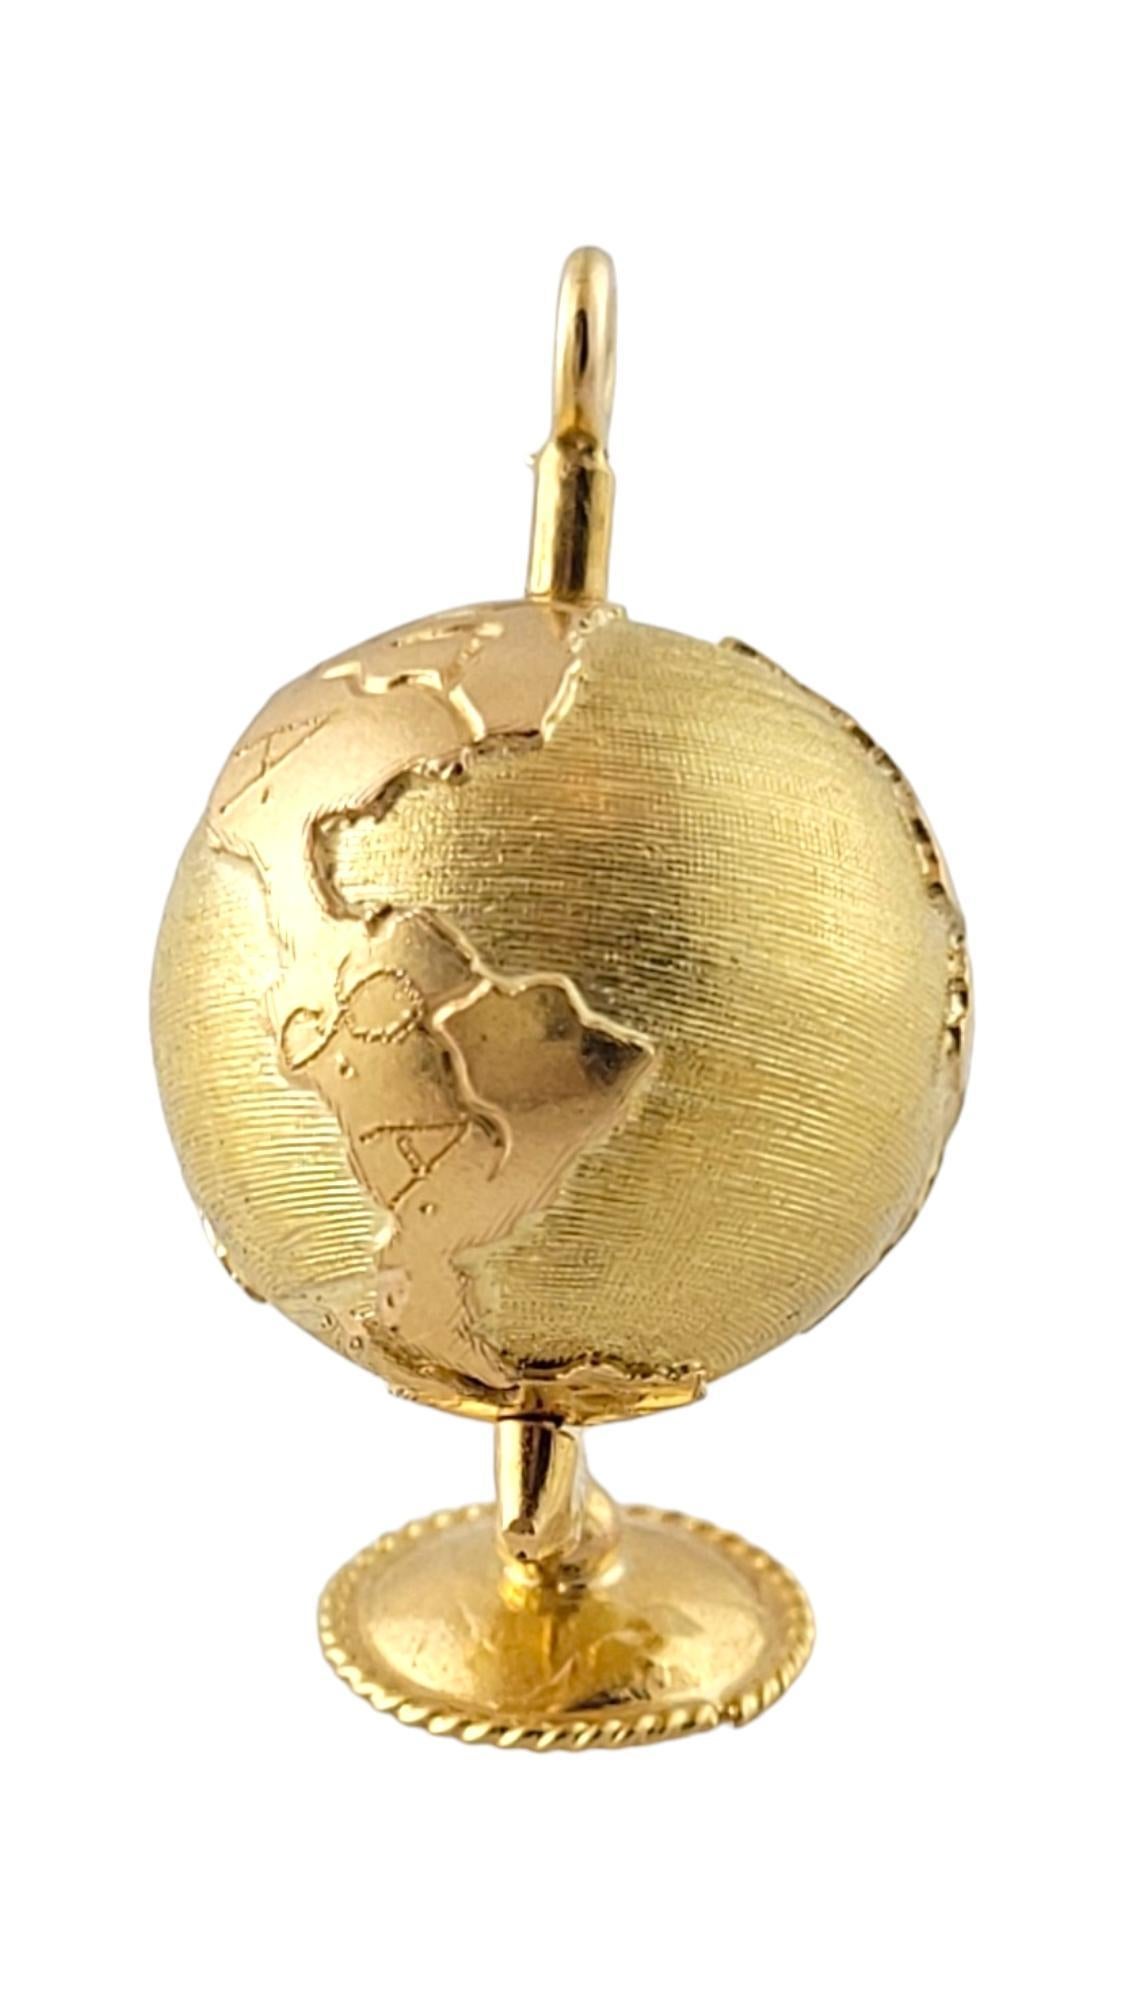 14K Yellow Gold Rotating Desk Globe Charm

This adorable globe charm is crafted from 14K yellow gold with amazing detail and even rotates like a real globe!

Size: 28.77mm X 20.77mm X 16.16mm

Weight: 4.60 dwt/ 7.15 g

Tested 14K

Very good